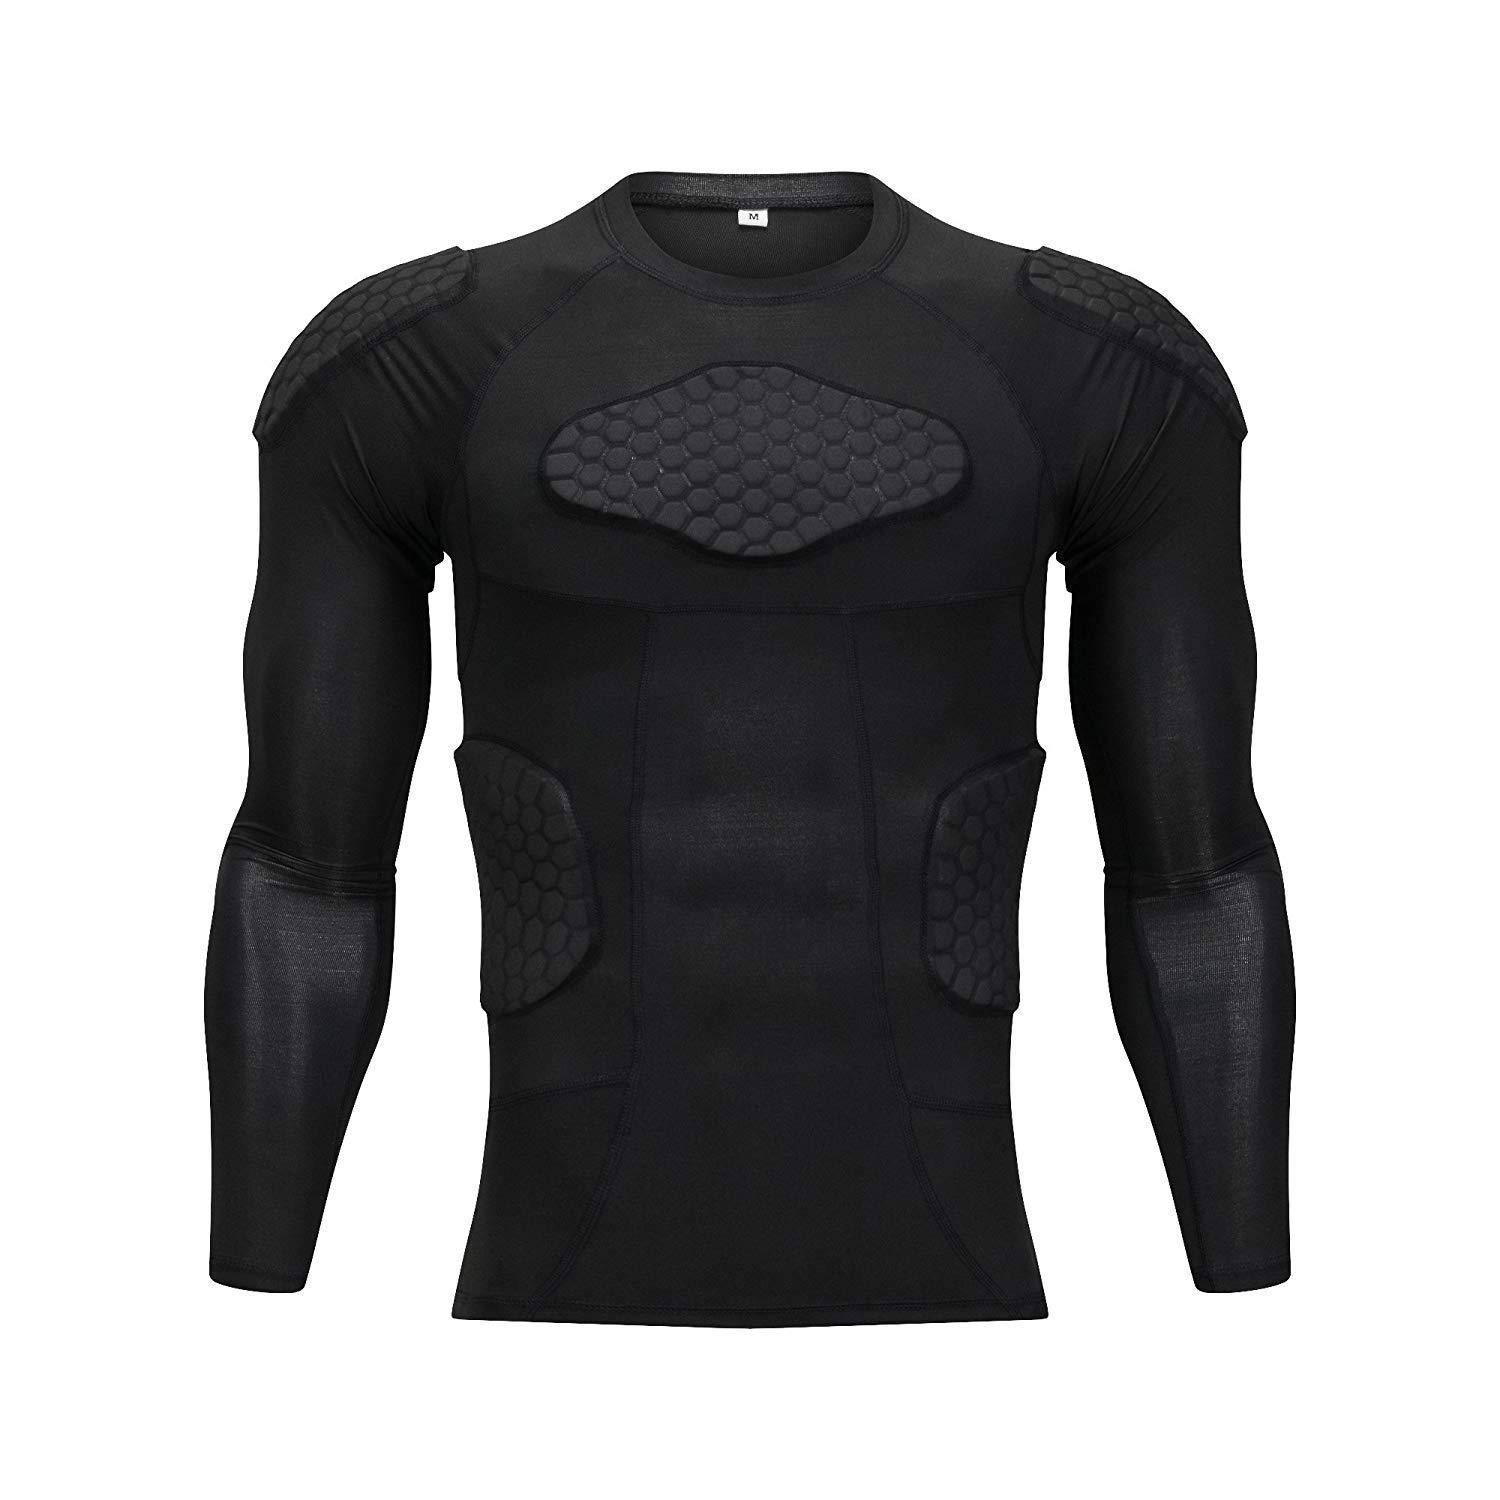 TUOY Mens Boys Body Safe Guard Padded Compression T-Shirt Short Sleeve Padded Shirt Rib Chest Protector for Rugby Basketball Football Paintball Cycling and Other Contact Sports